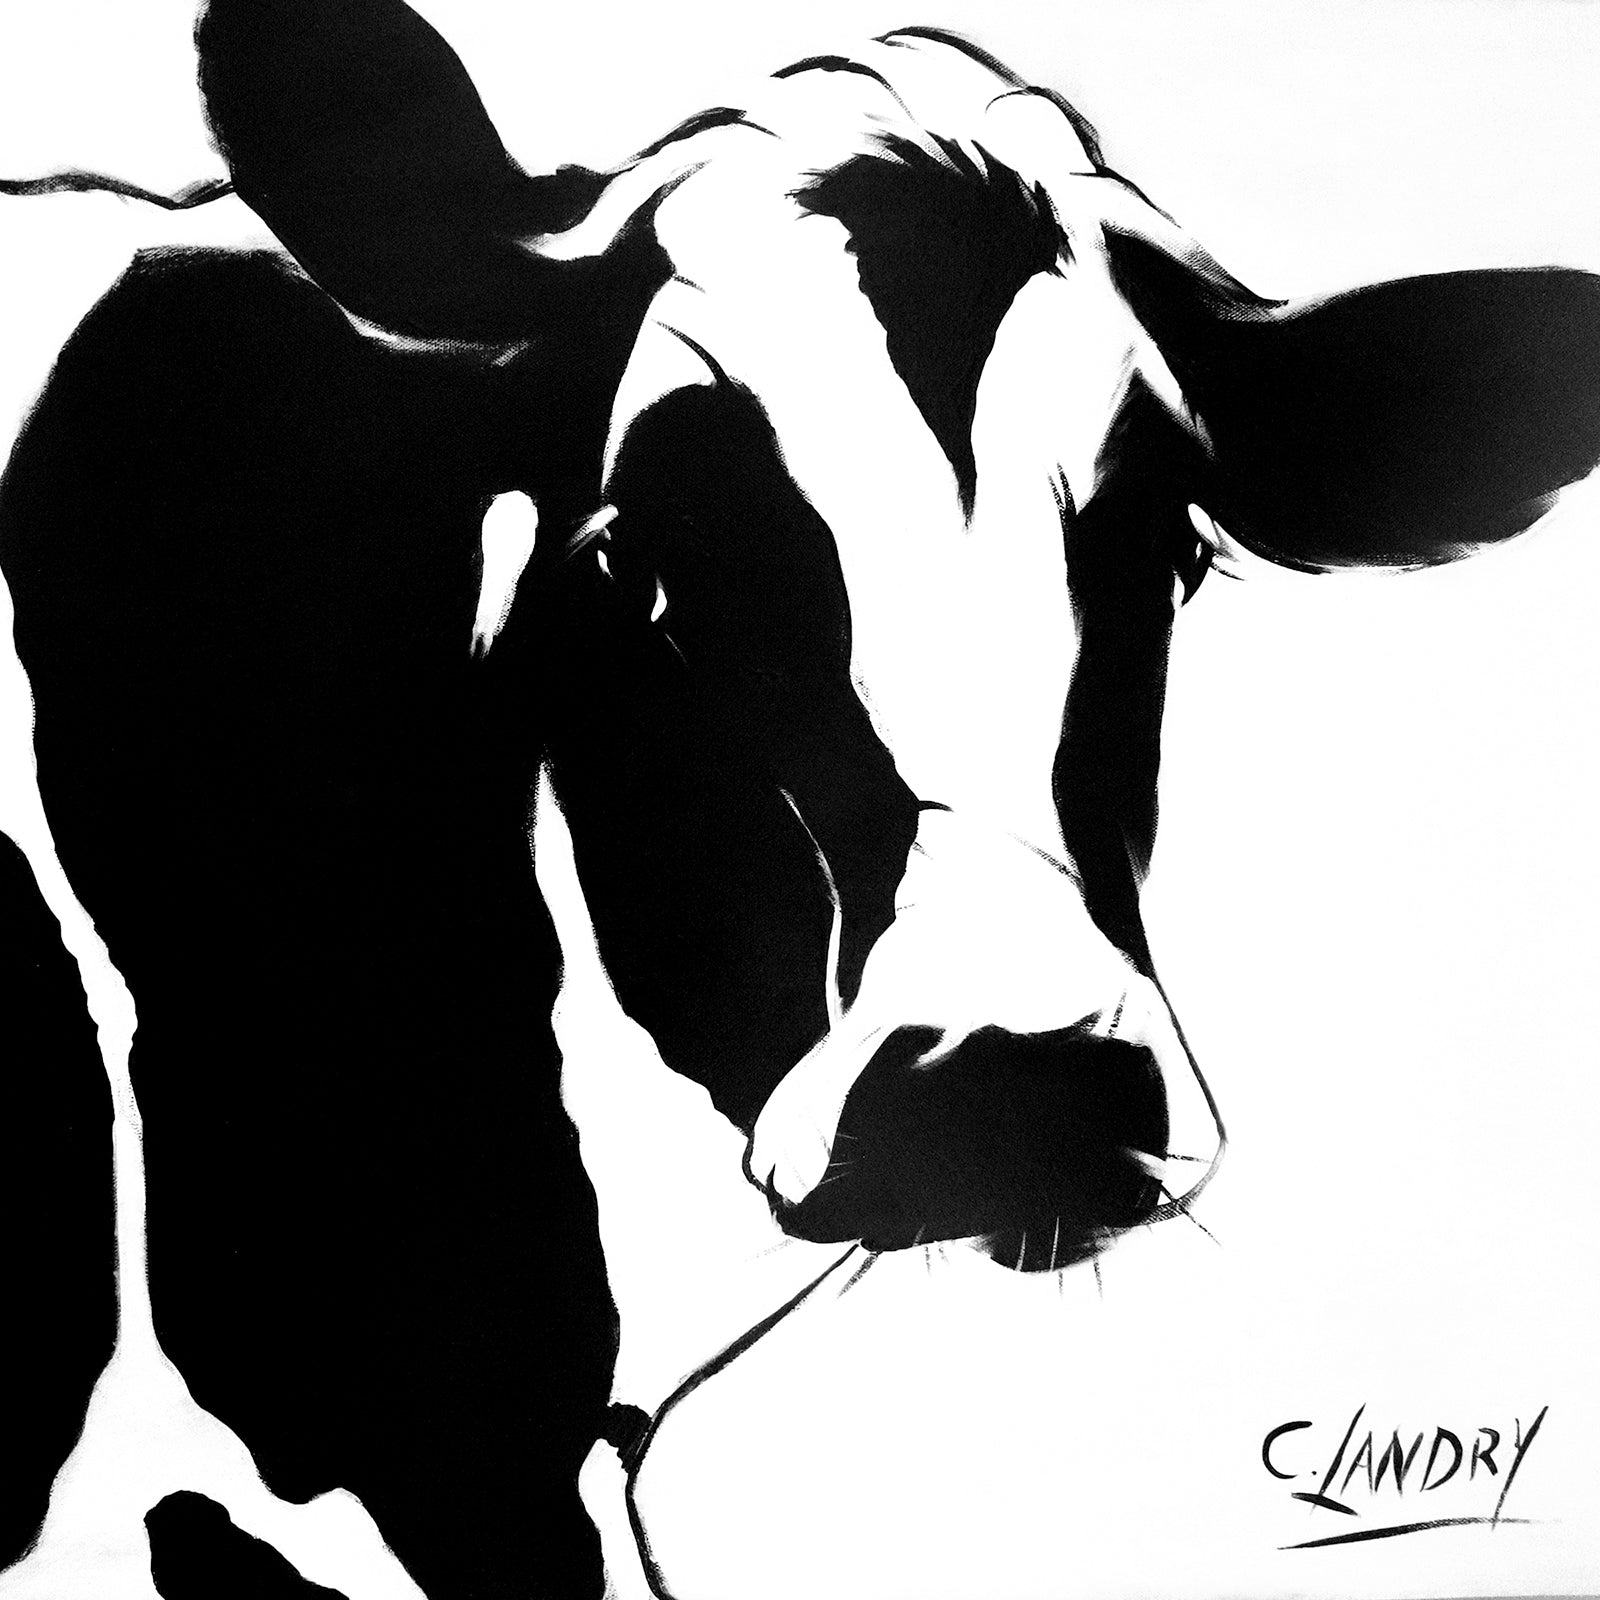 Cow Art, 'Modern Cow', Painted by Artist Carol Landry, 8"x 8' copy on Canvas